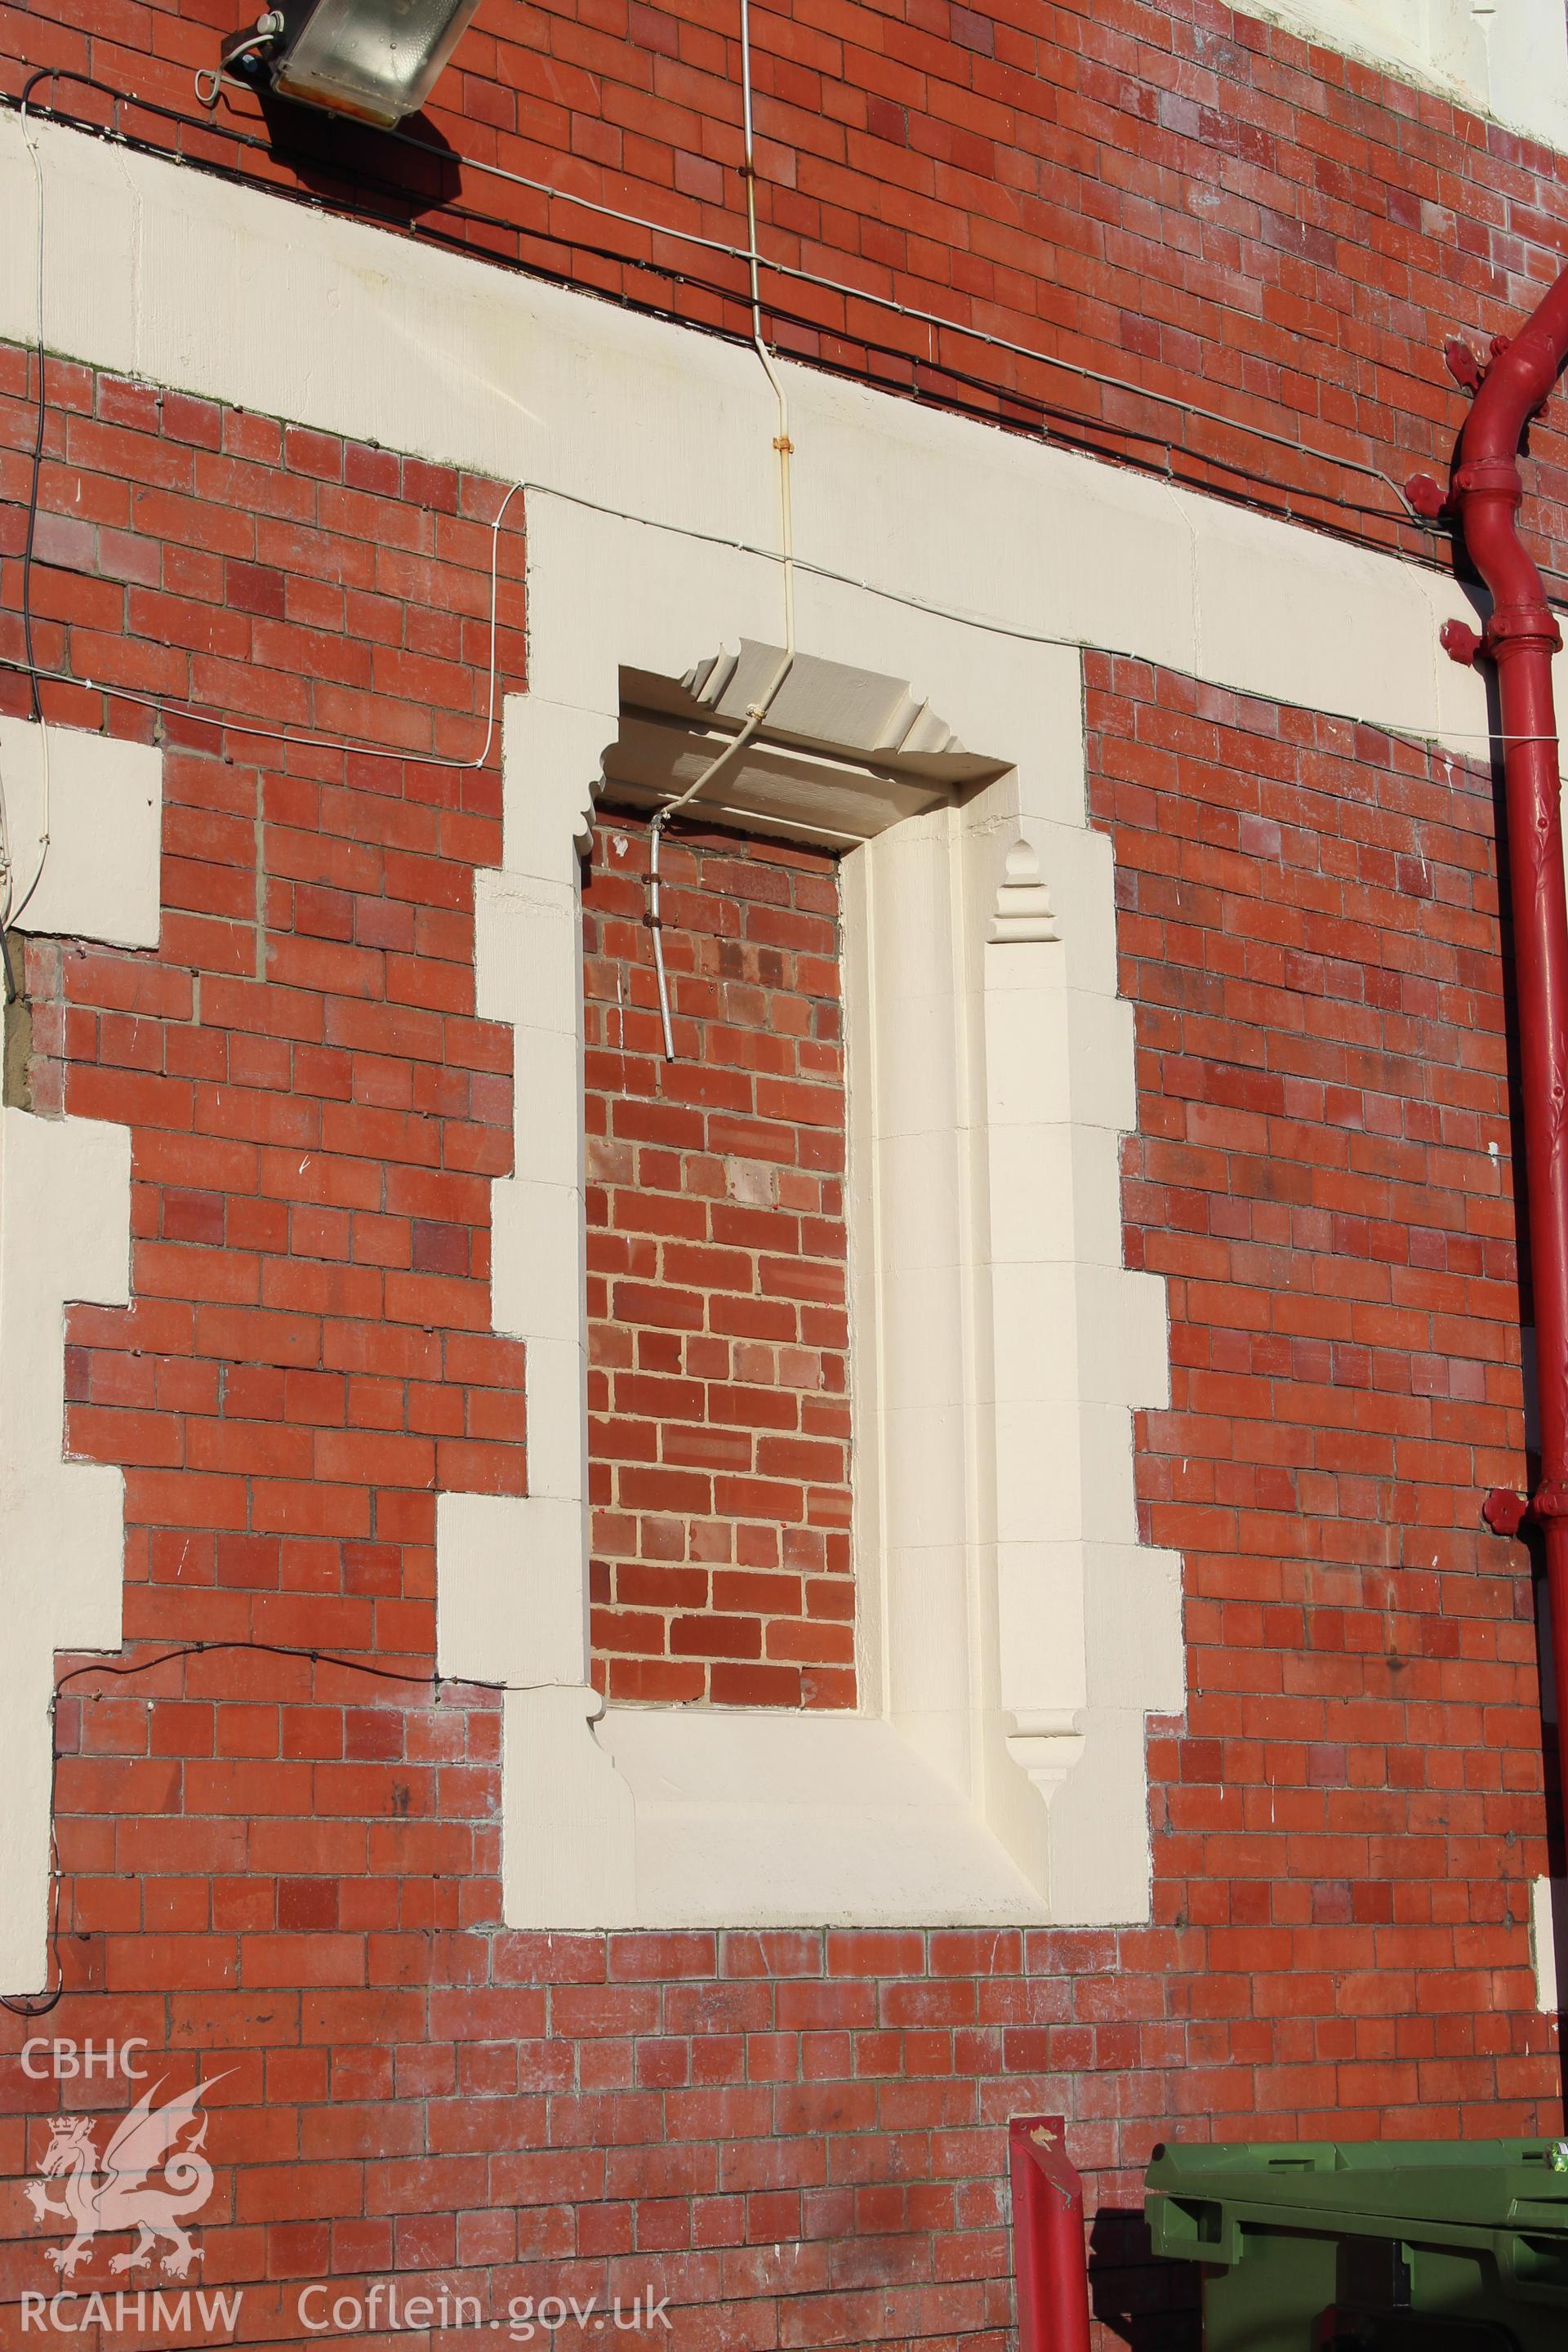 Detailed view of bricked-up window on side elevation wall at the Railway Institute, Bangor. Photographed during survey conducted by Sue Fielding for the RCAHMW on 4th April 2016.